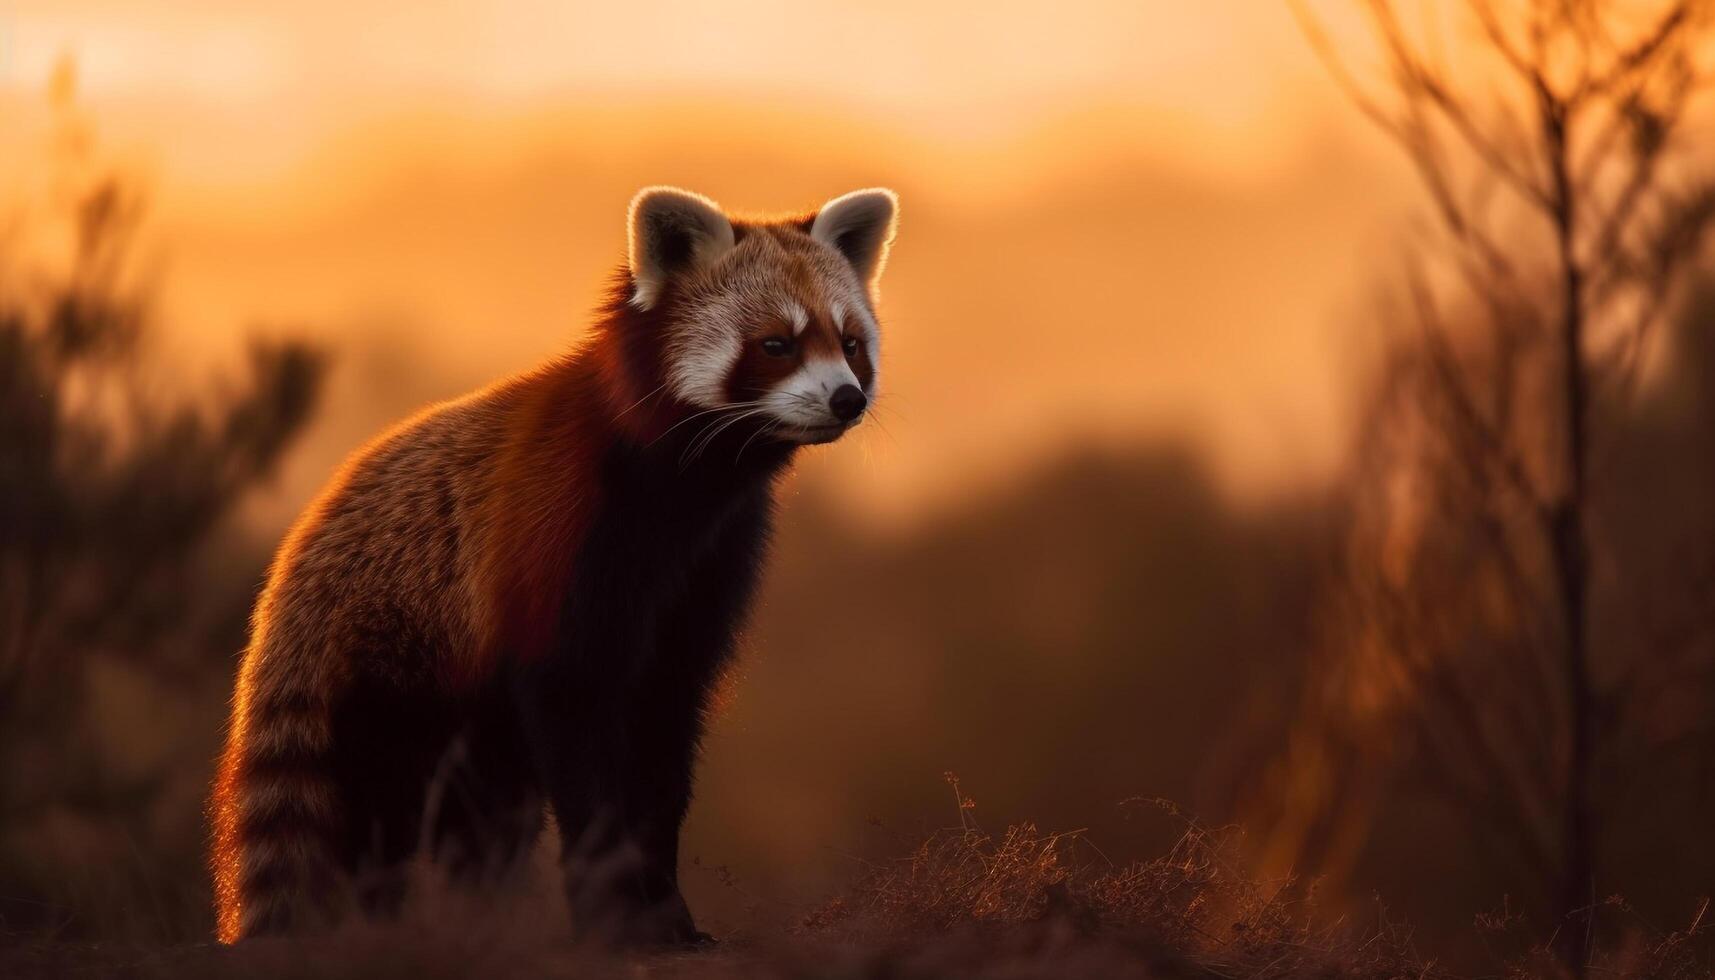 Red panda sitting in grass, looking alert generated by AI photo